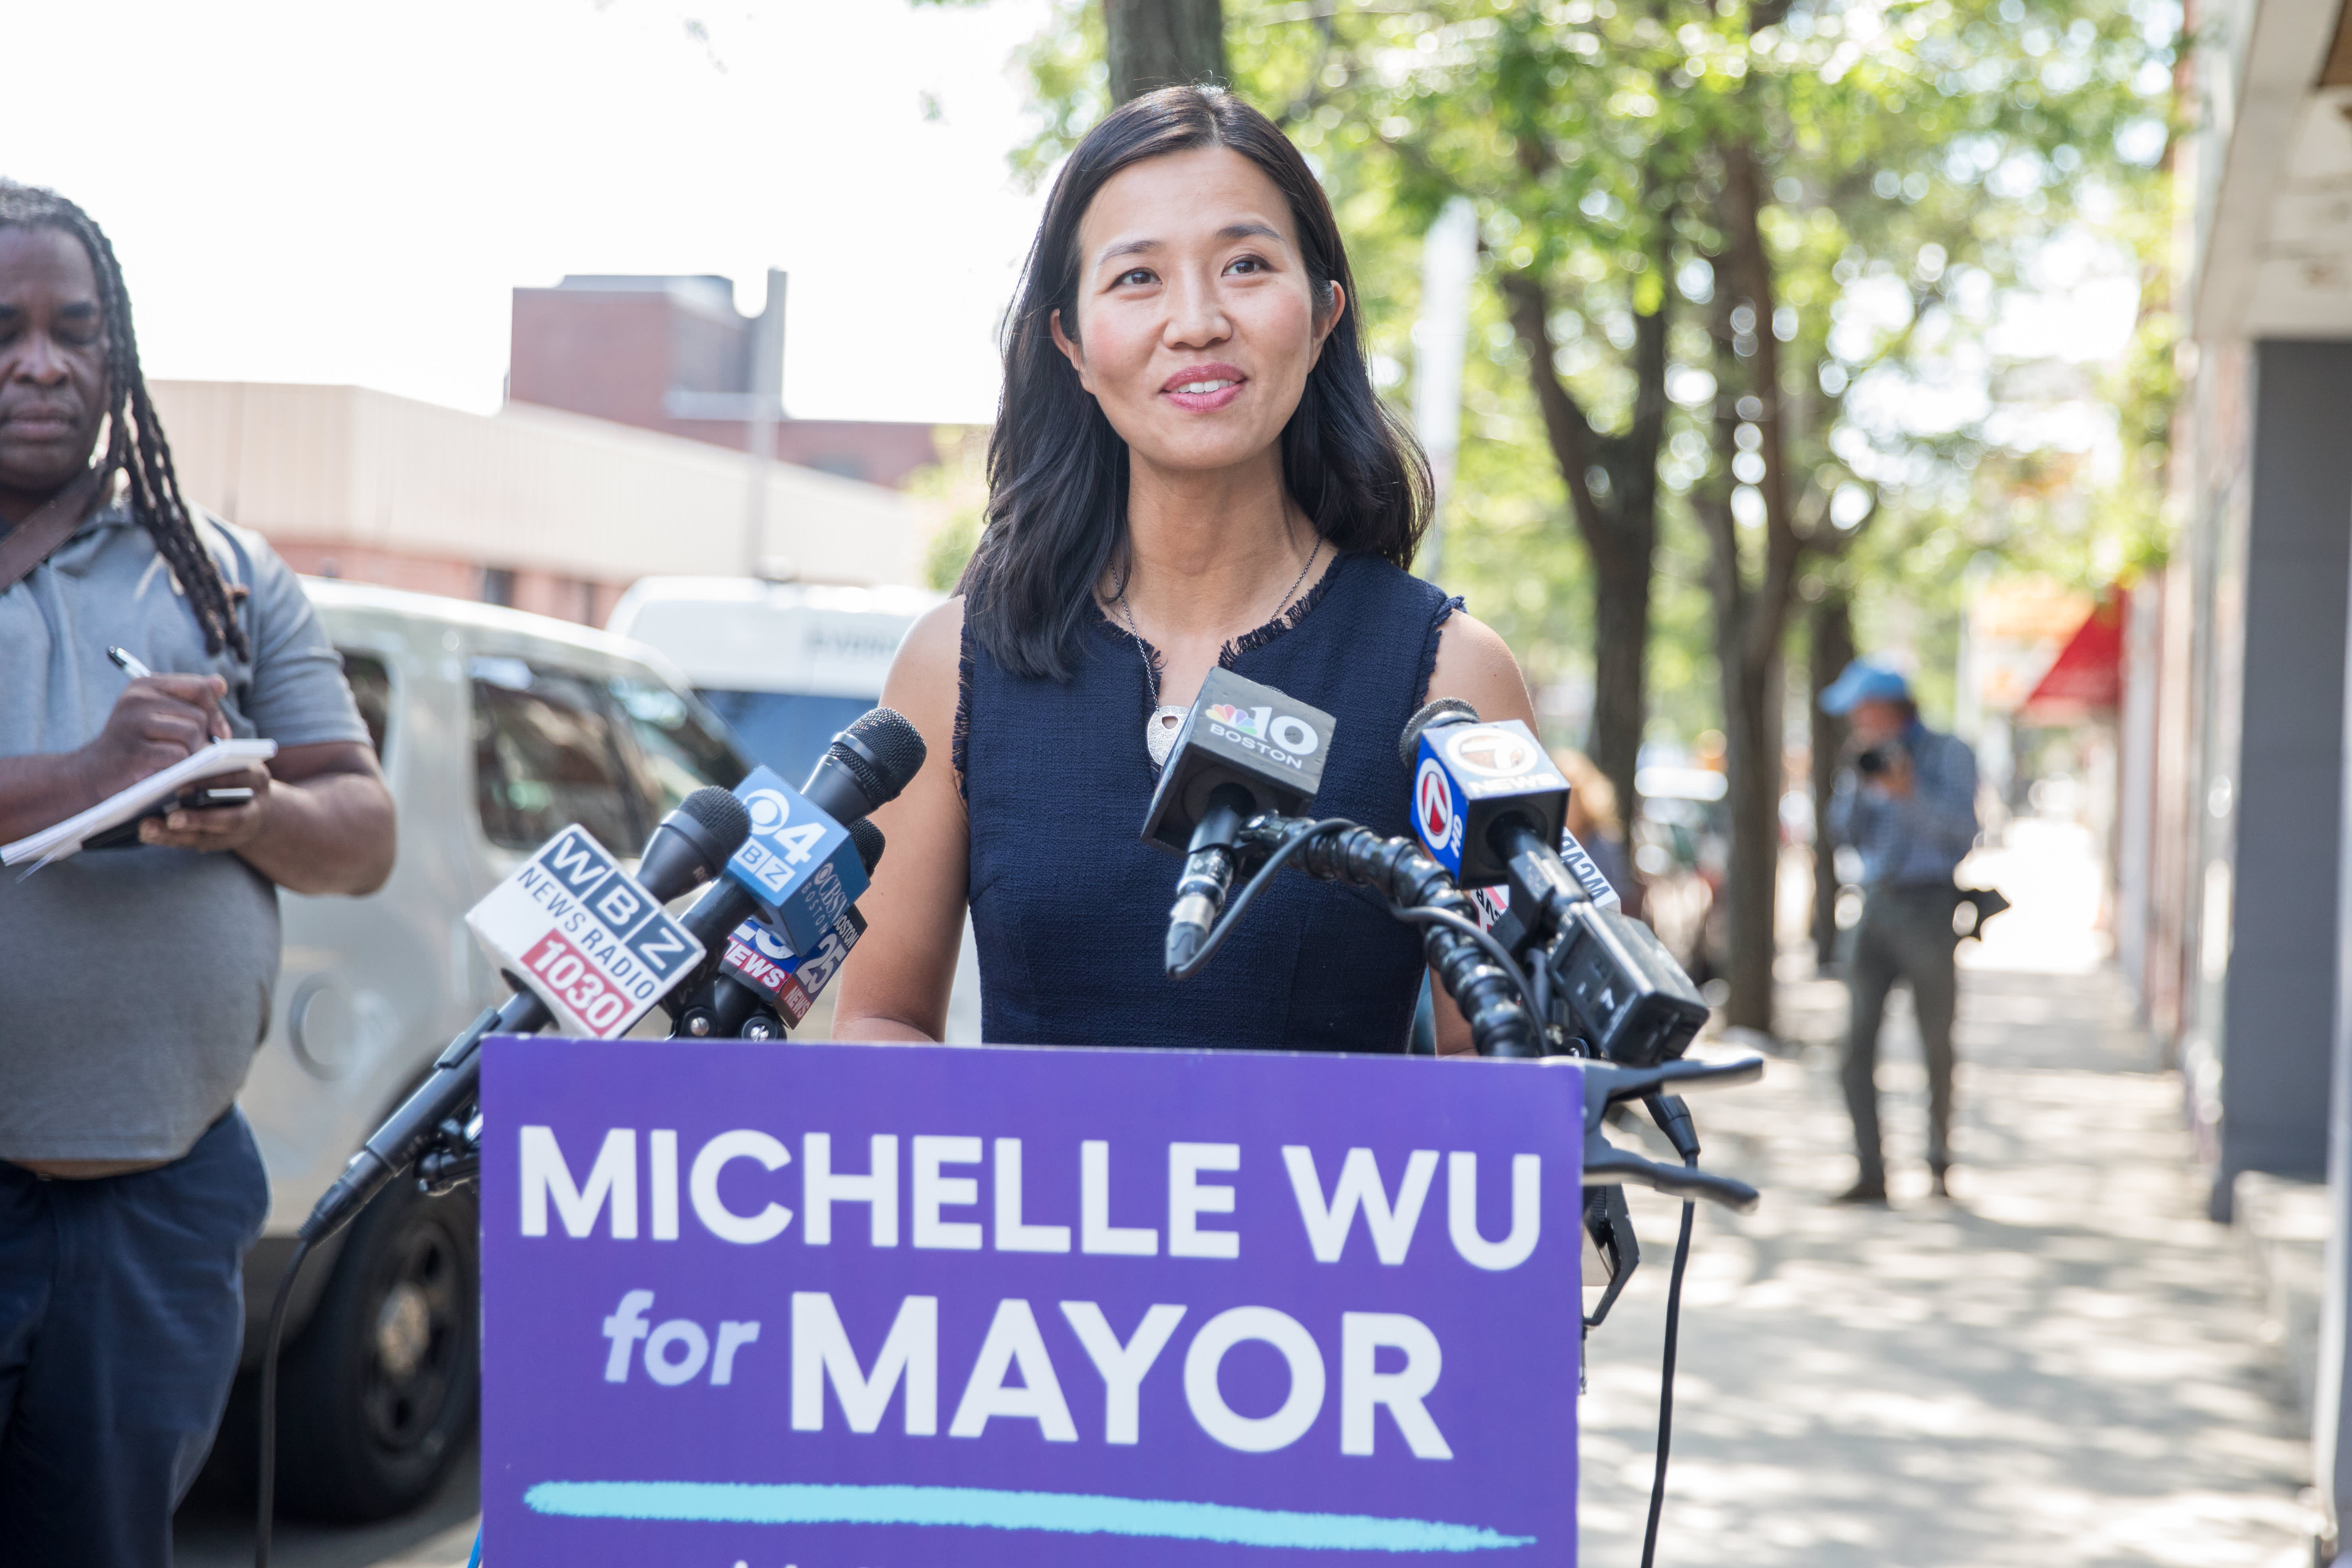 Michelle Wu makes history as the first woman and first person of color elected mayor of Boston – CNBC